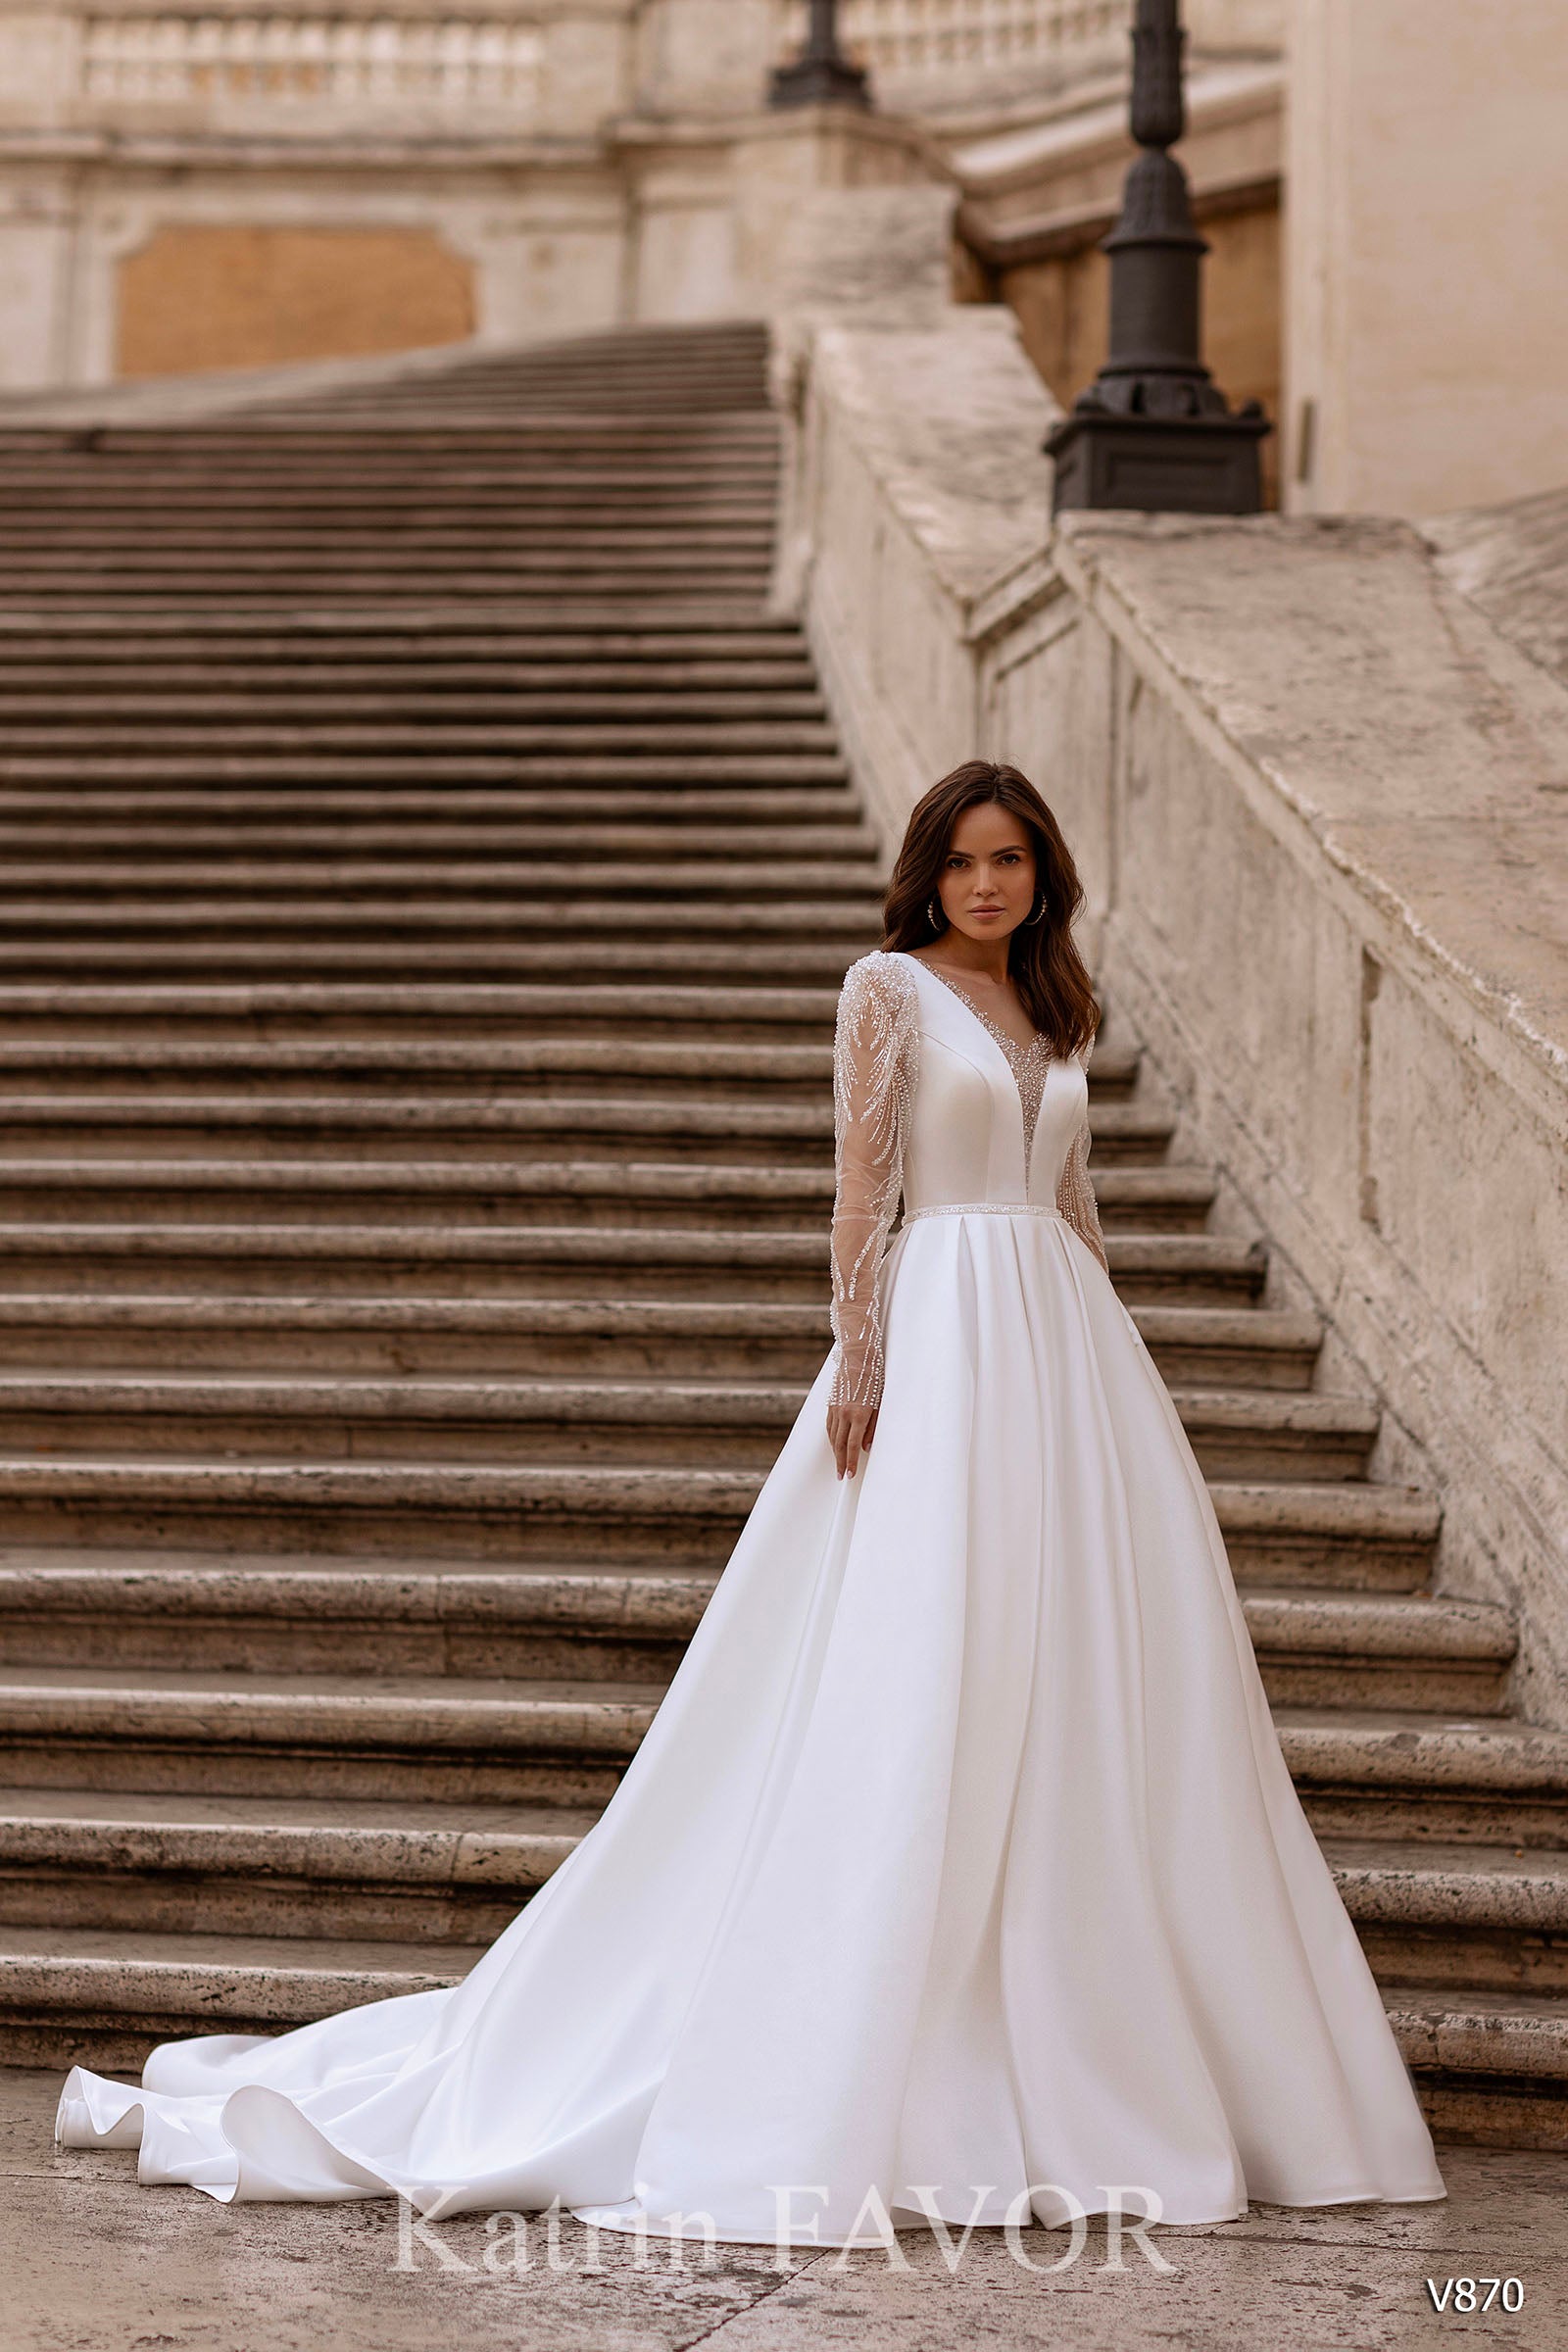 KatrinFAVORboutique-Wedding dress with sheer sleeves satin a line wedding gown